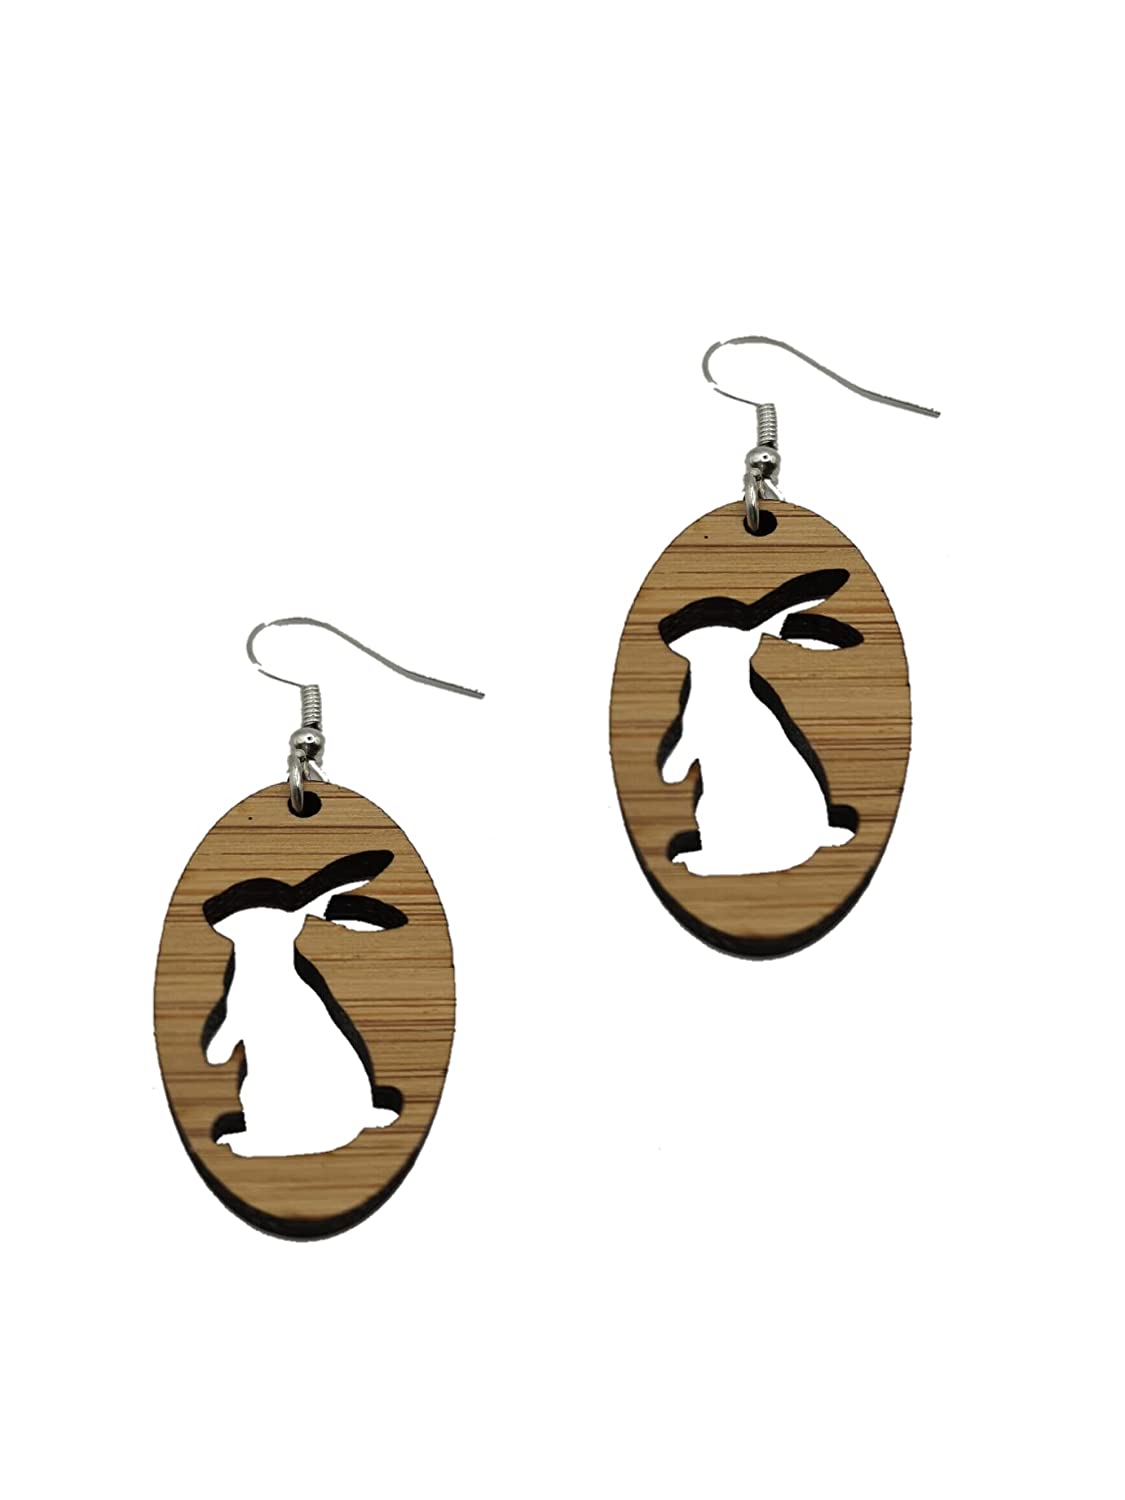 Easter Egg Bunny Bamboo Earrings - customise to suit your style with Gold, Rose Gold, Dark Gold or Silver findings (One of each style)